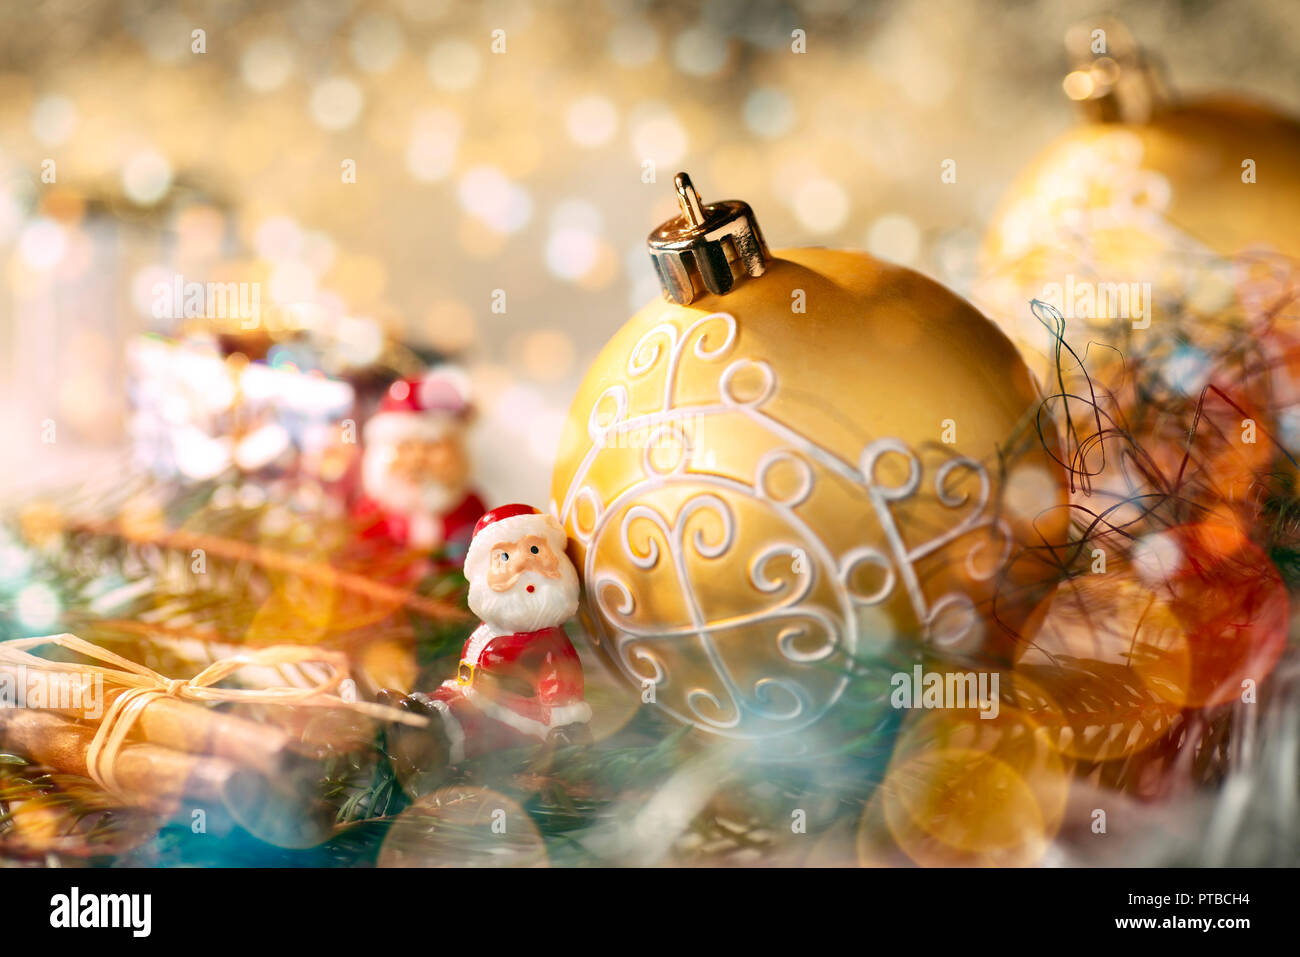 Golden bauble with Christmas decoration and little figure as Santa Claus Stock Photo